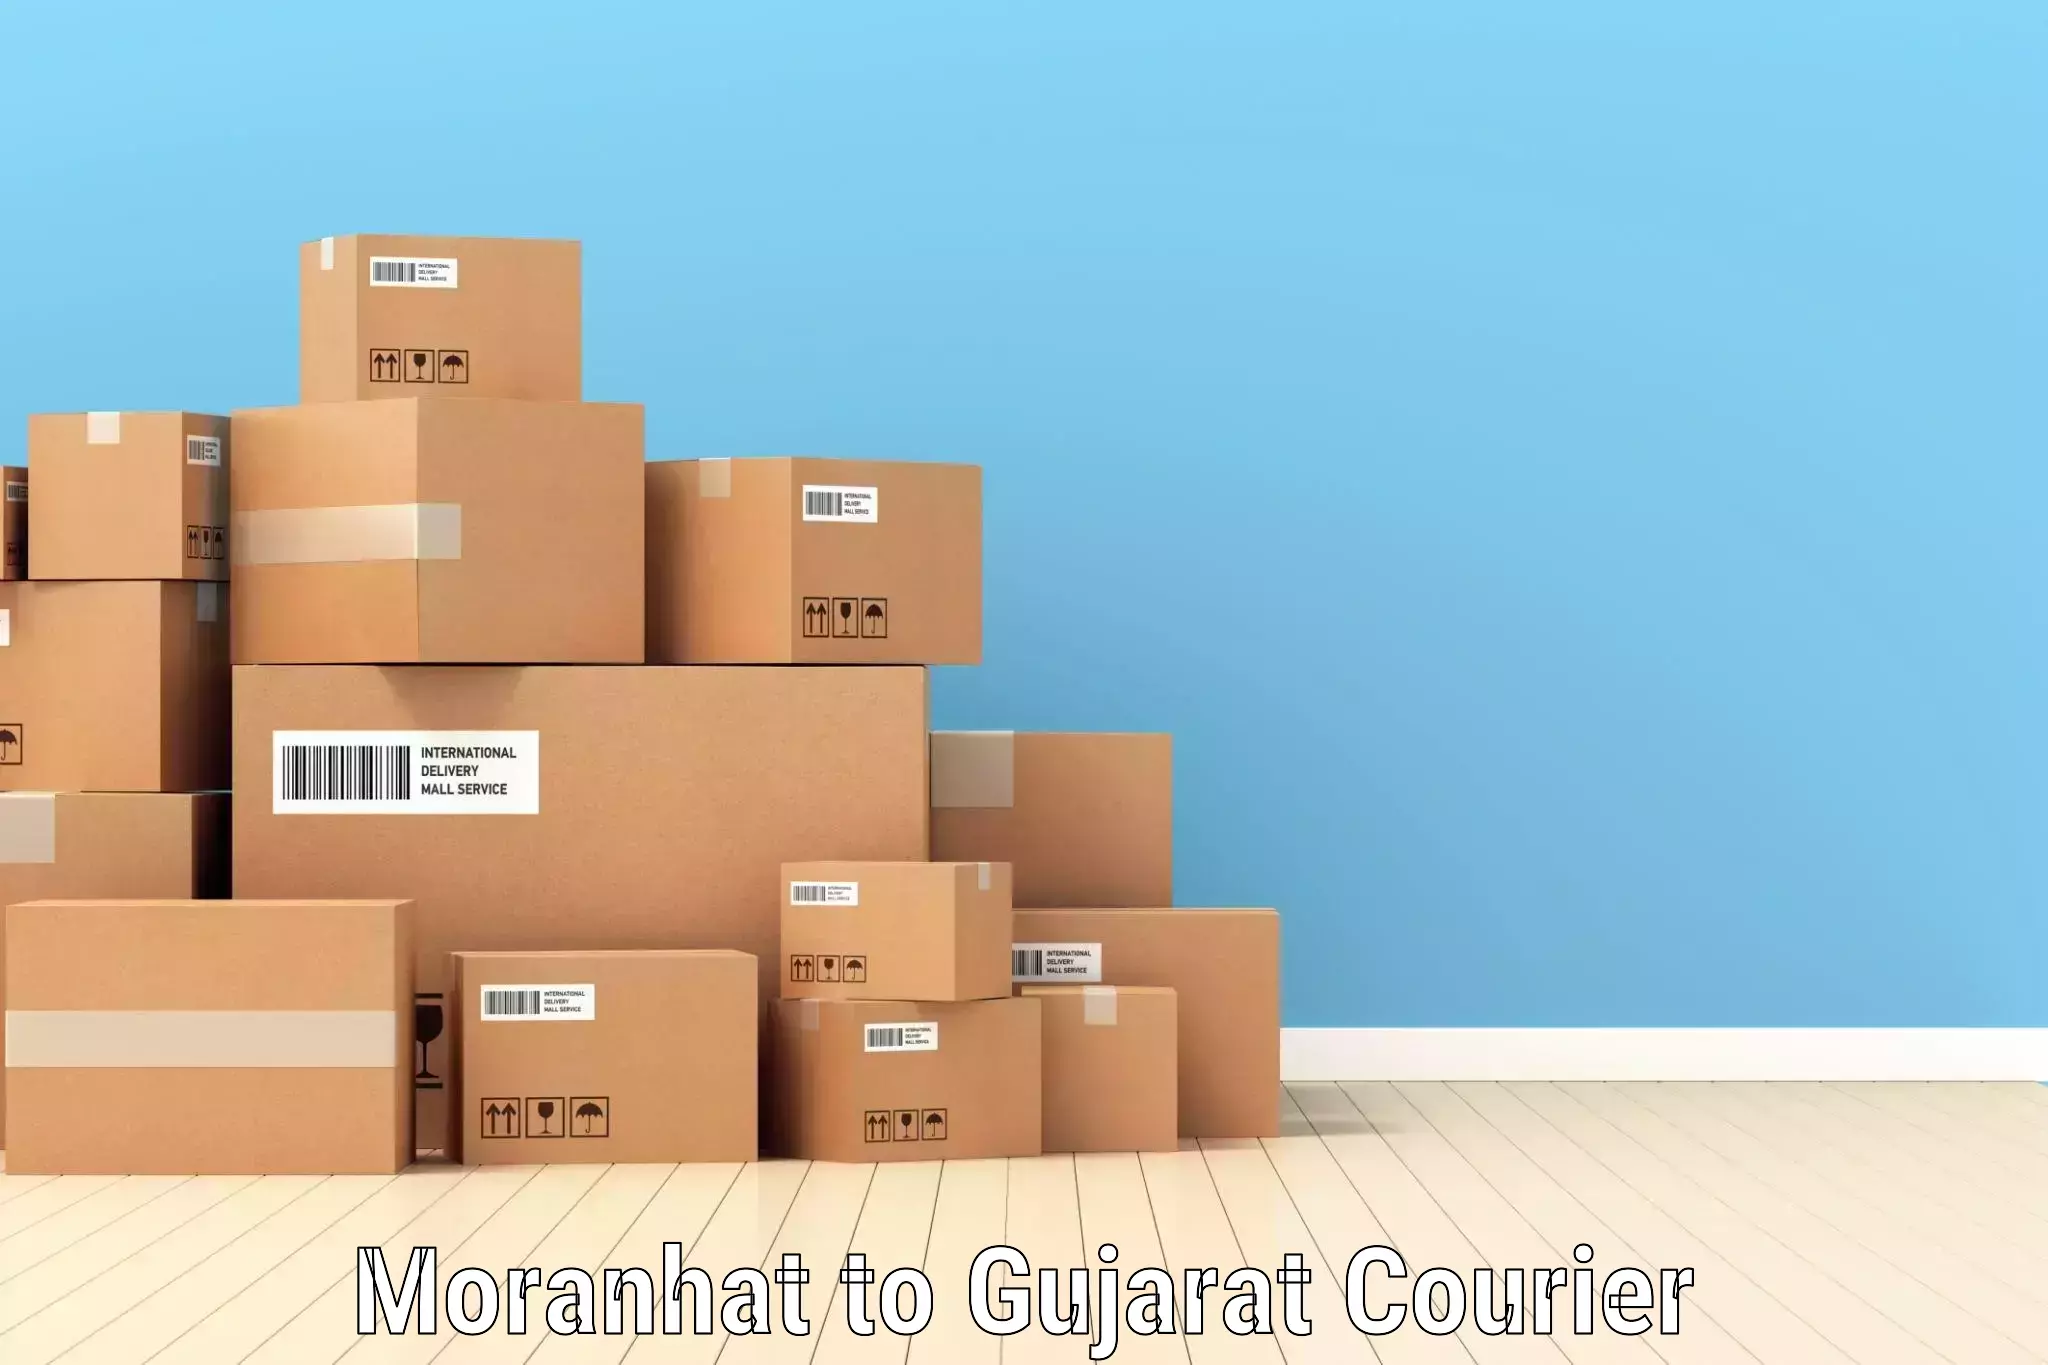 Next-generation courier services Moranhat to Ahmedabad